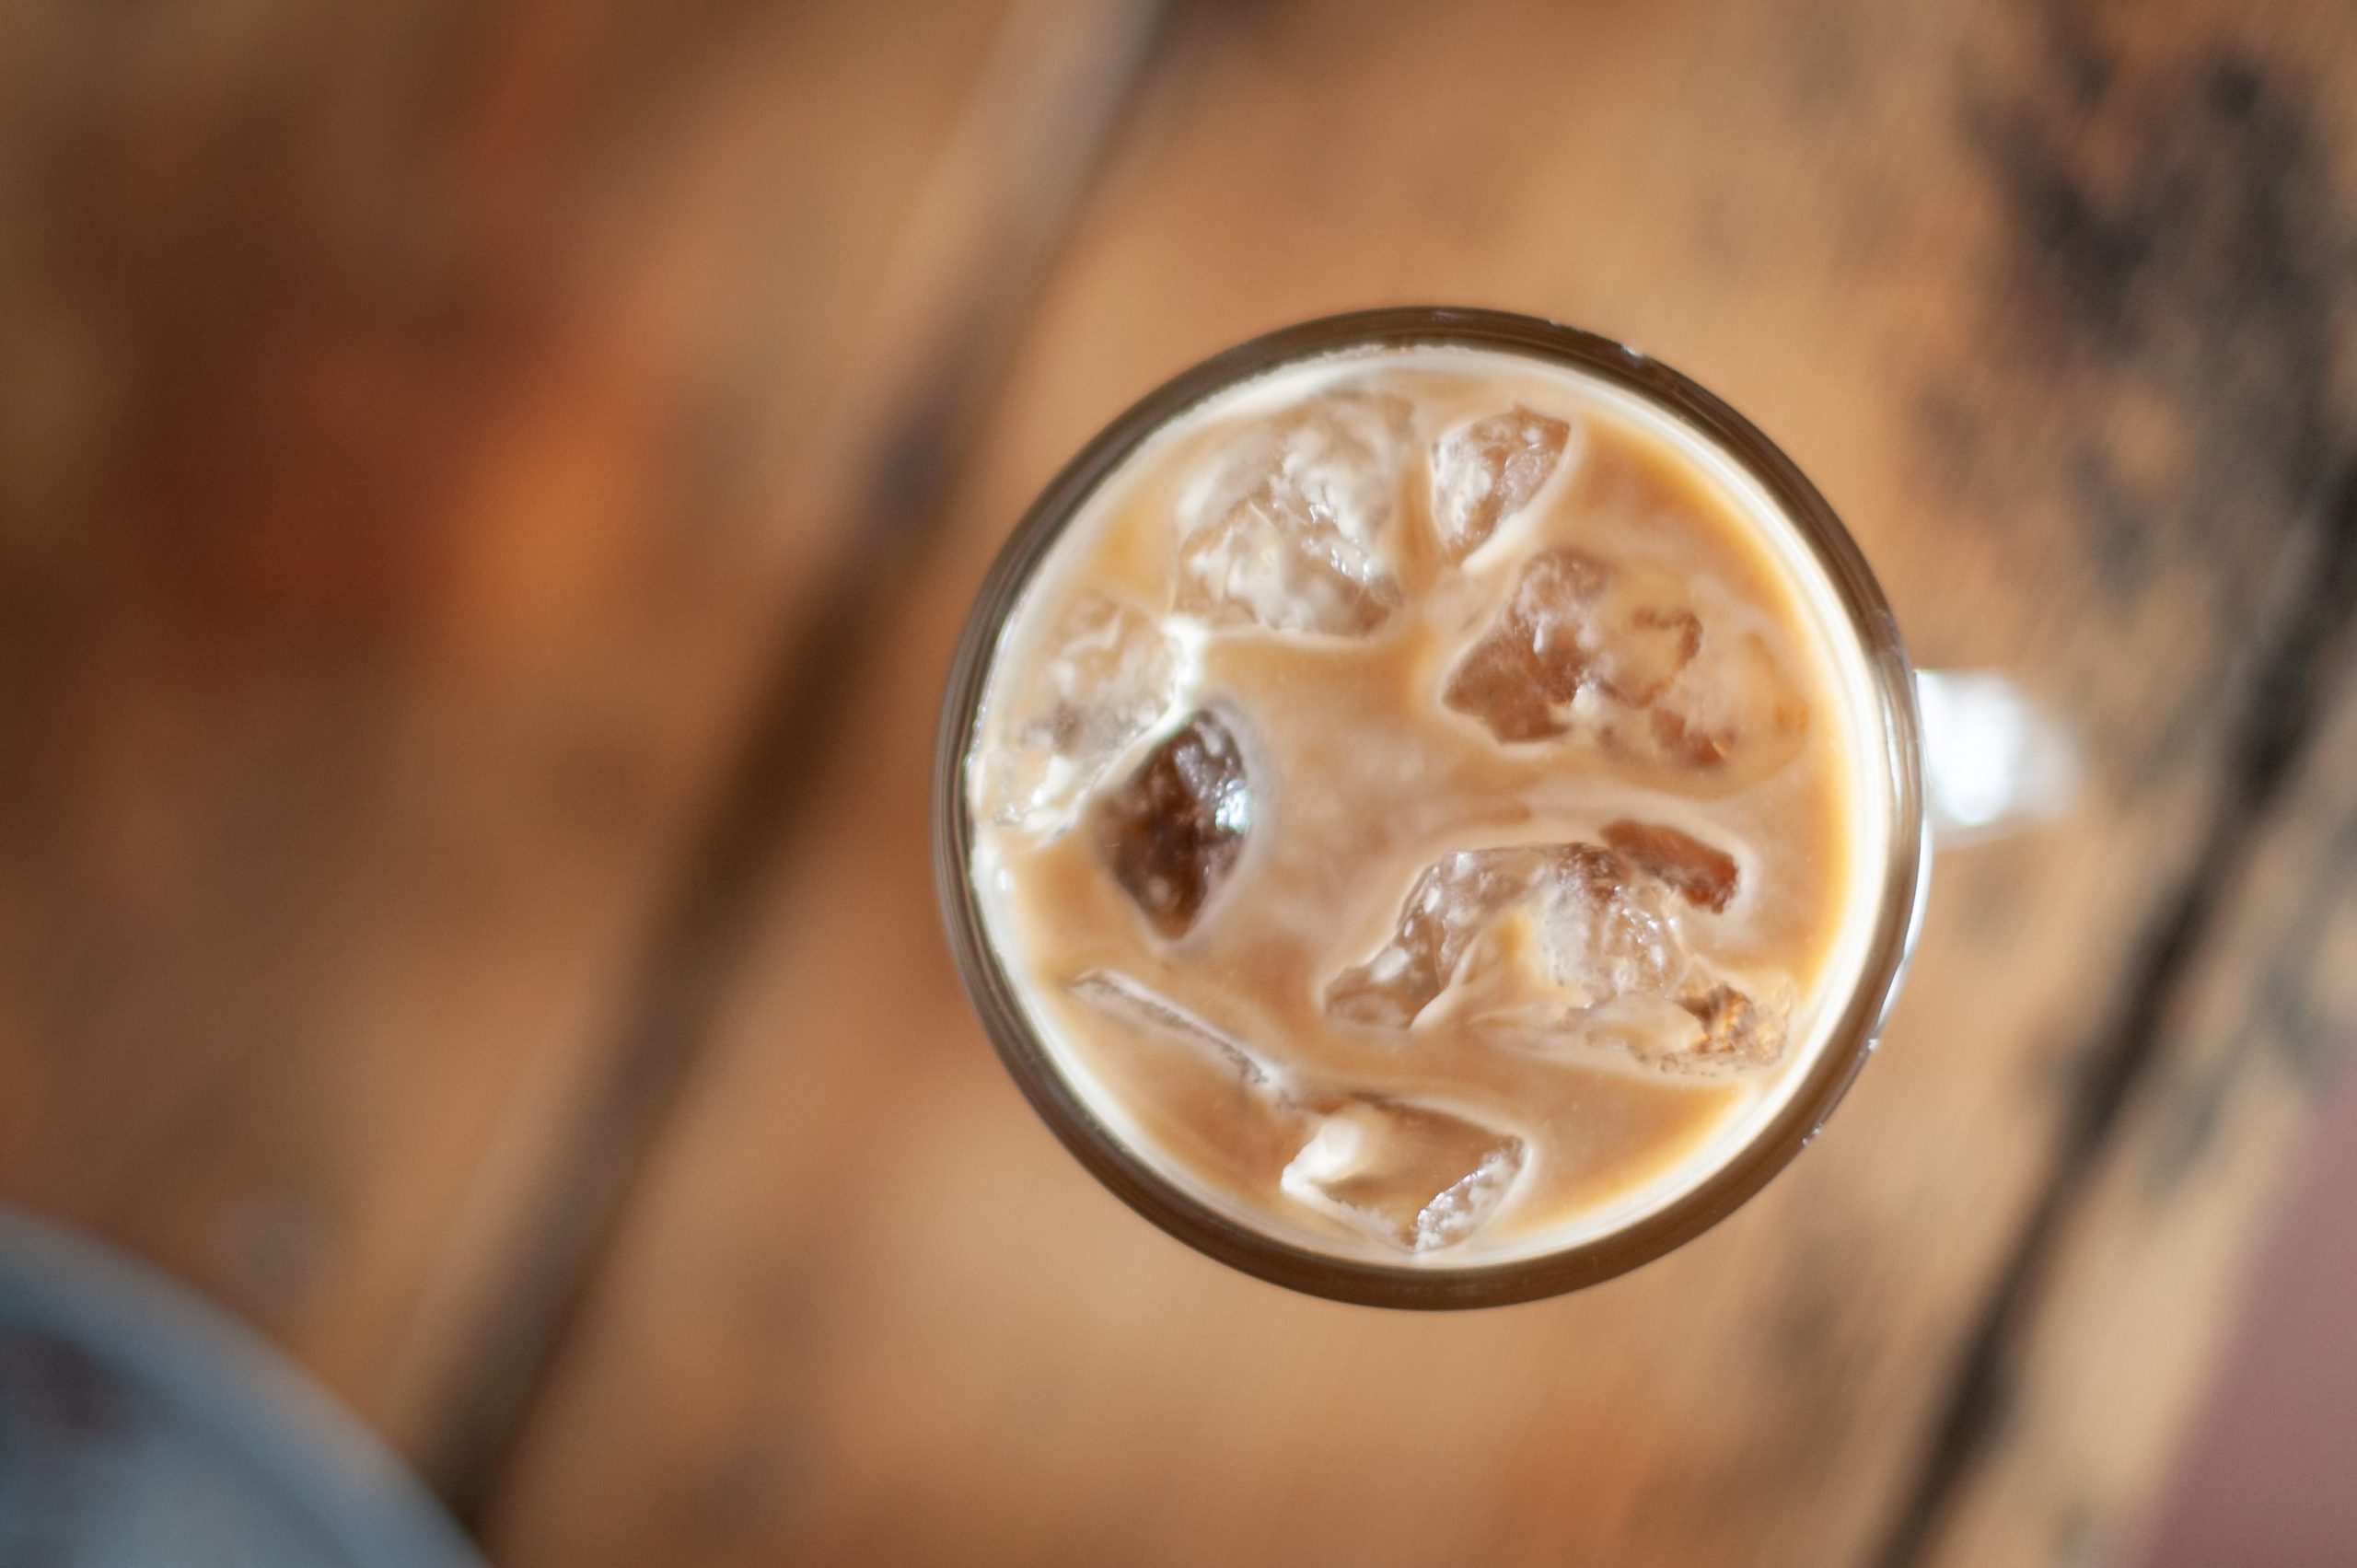 Iced latte from above